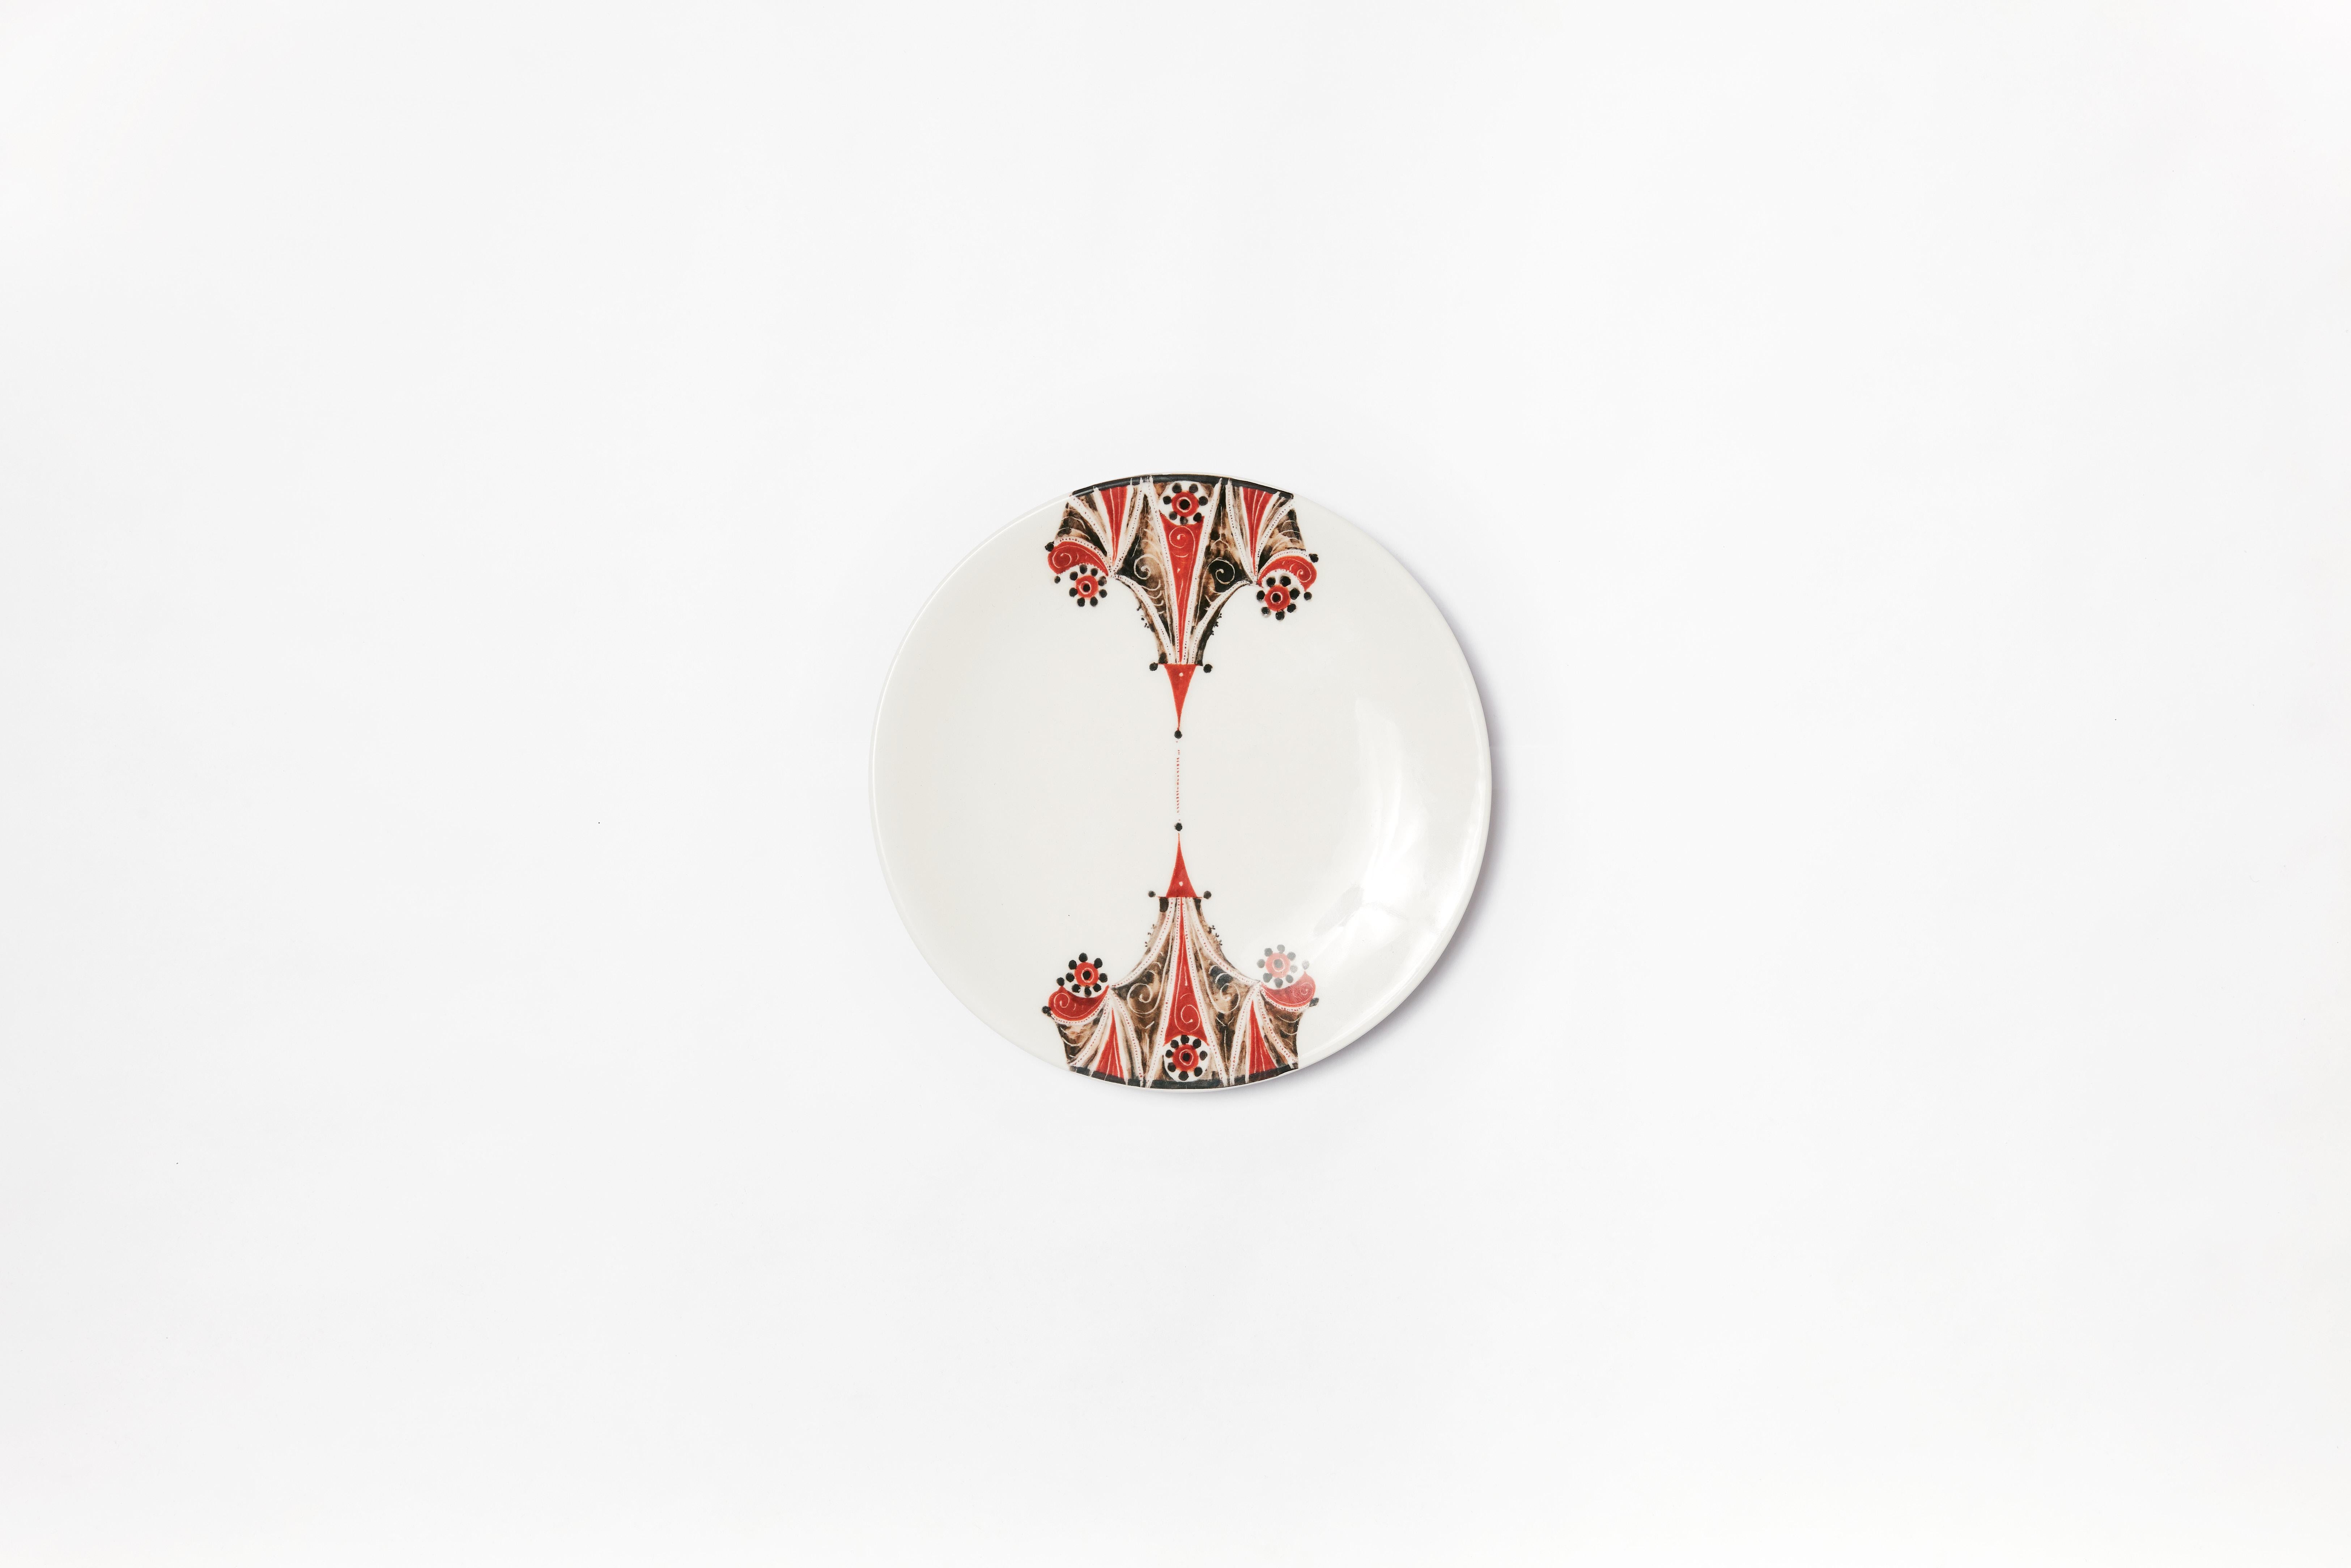 Along the ancient trade route that connected China to the Mediterranean lies Samarkand, a land of encounters, a crossroads city of cultures and traditions.
The new Dish Collection takes us back to the traces of this ancient past by reinterpreting